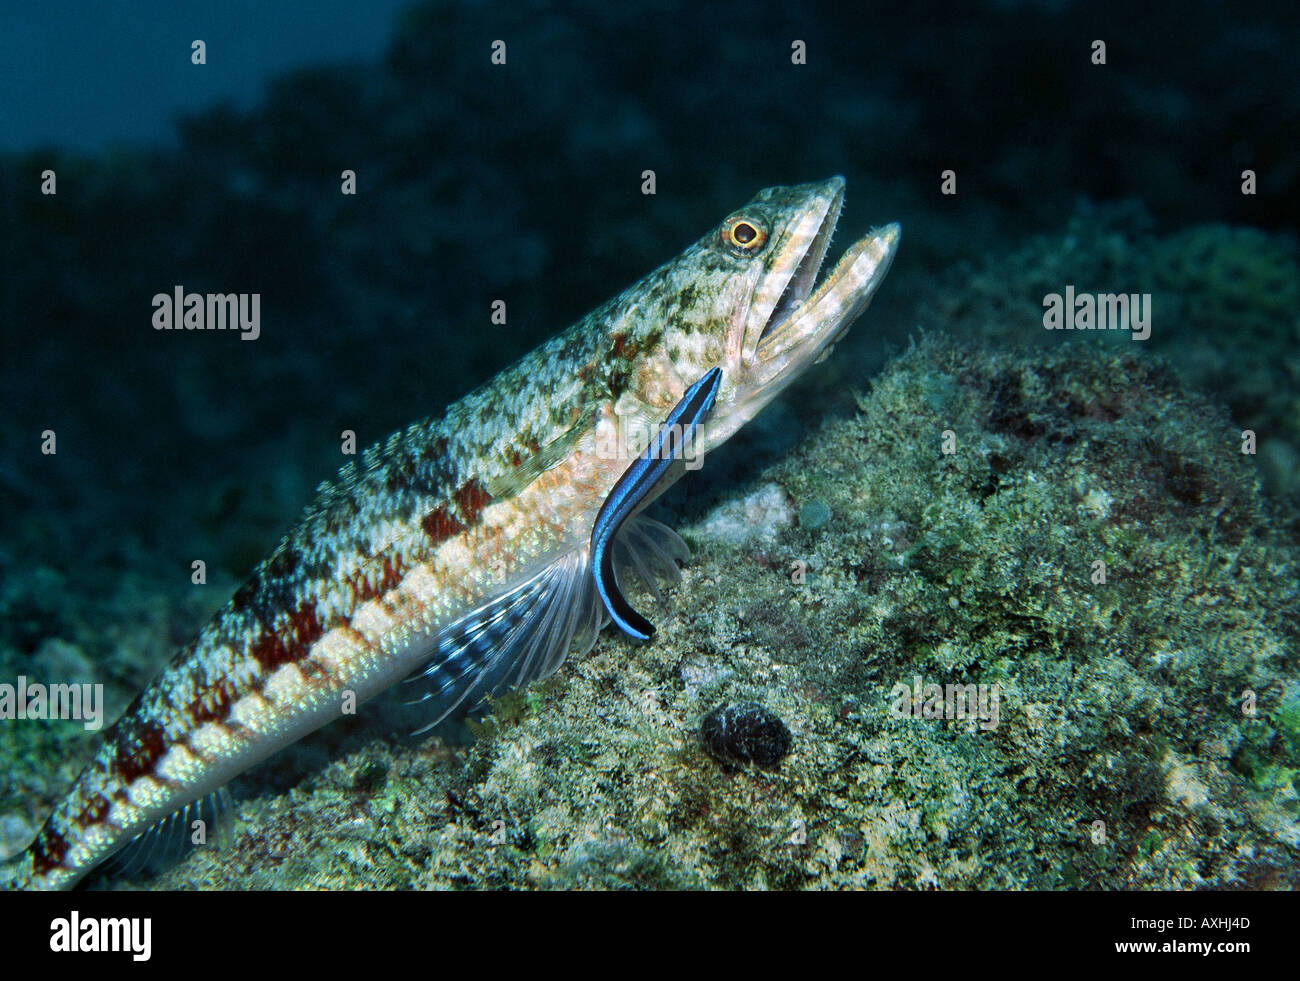 close-up of lizardfish with cleaner wrasse Stock Photo